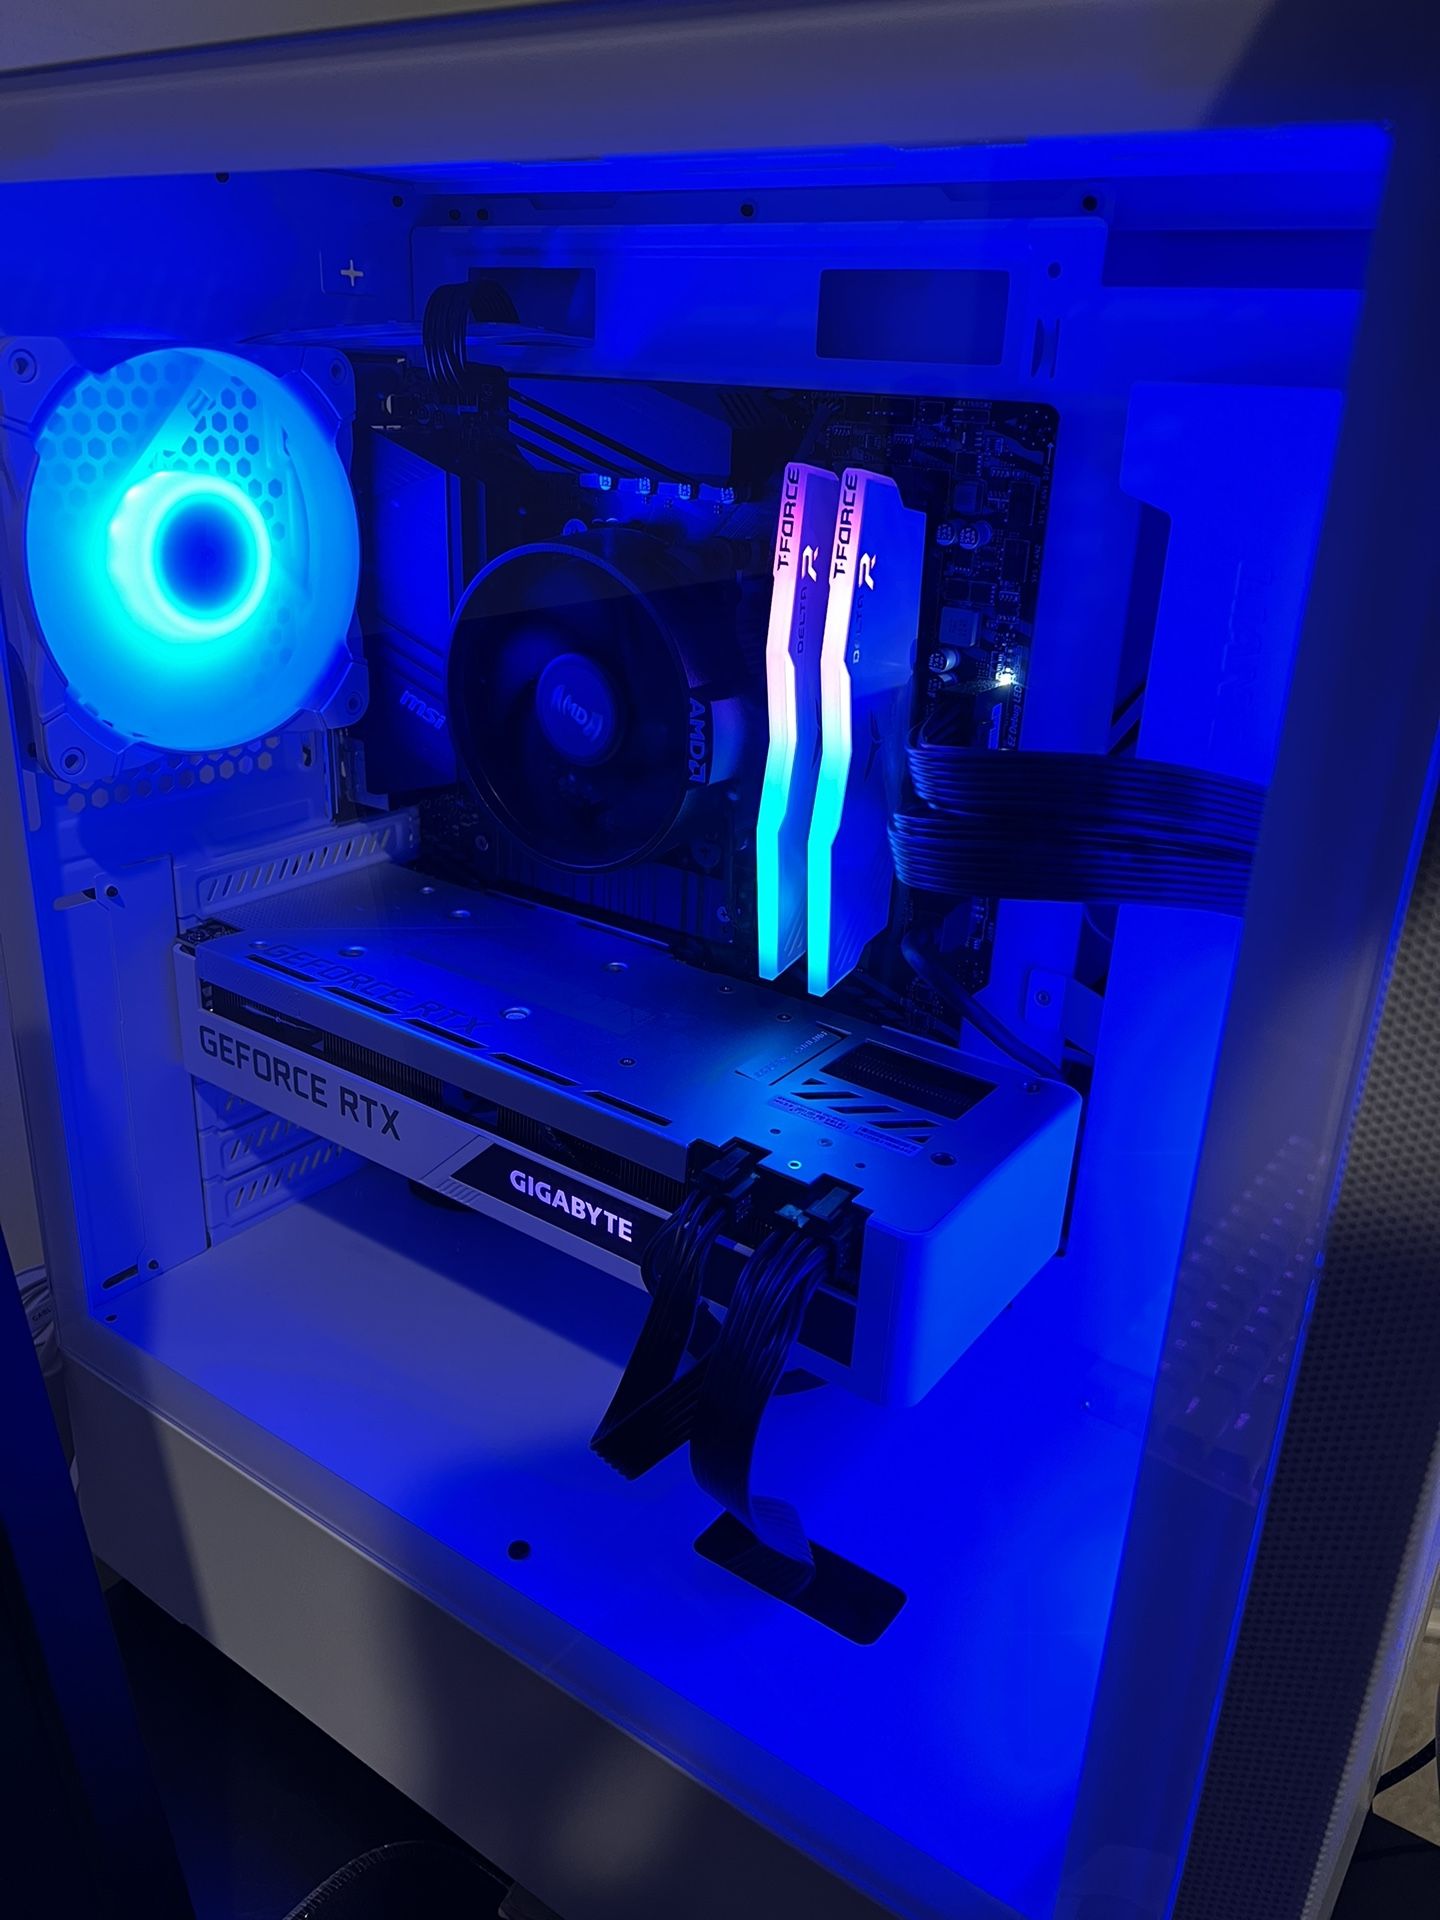 custom built gaming pc with a rtx 3070 vision oc, mid range build.